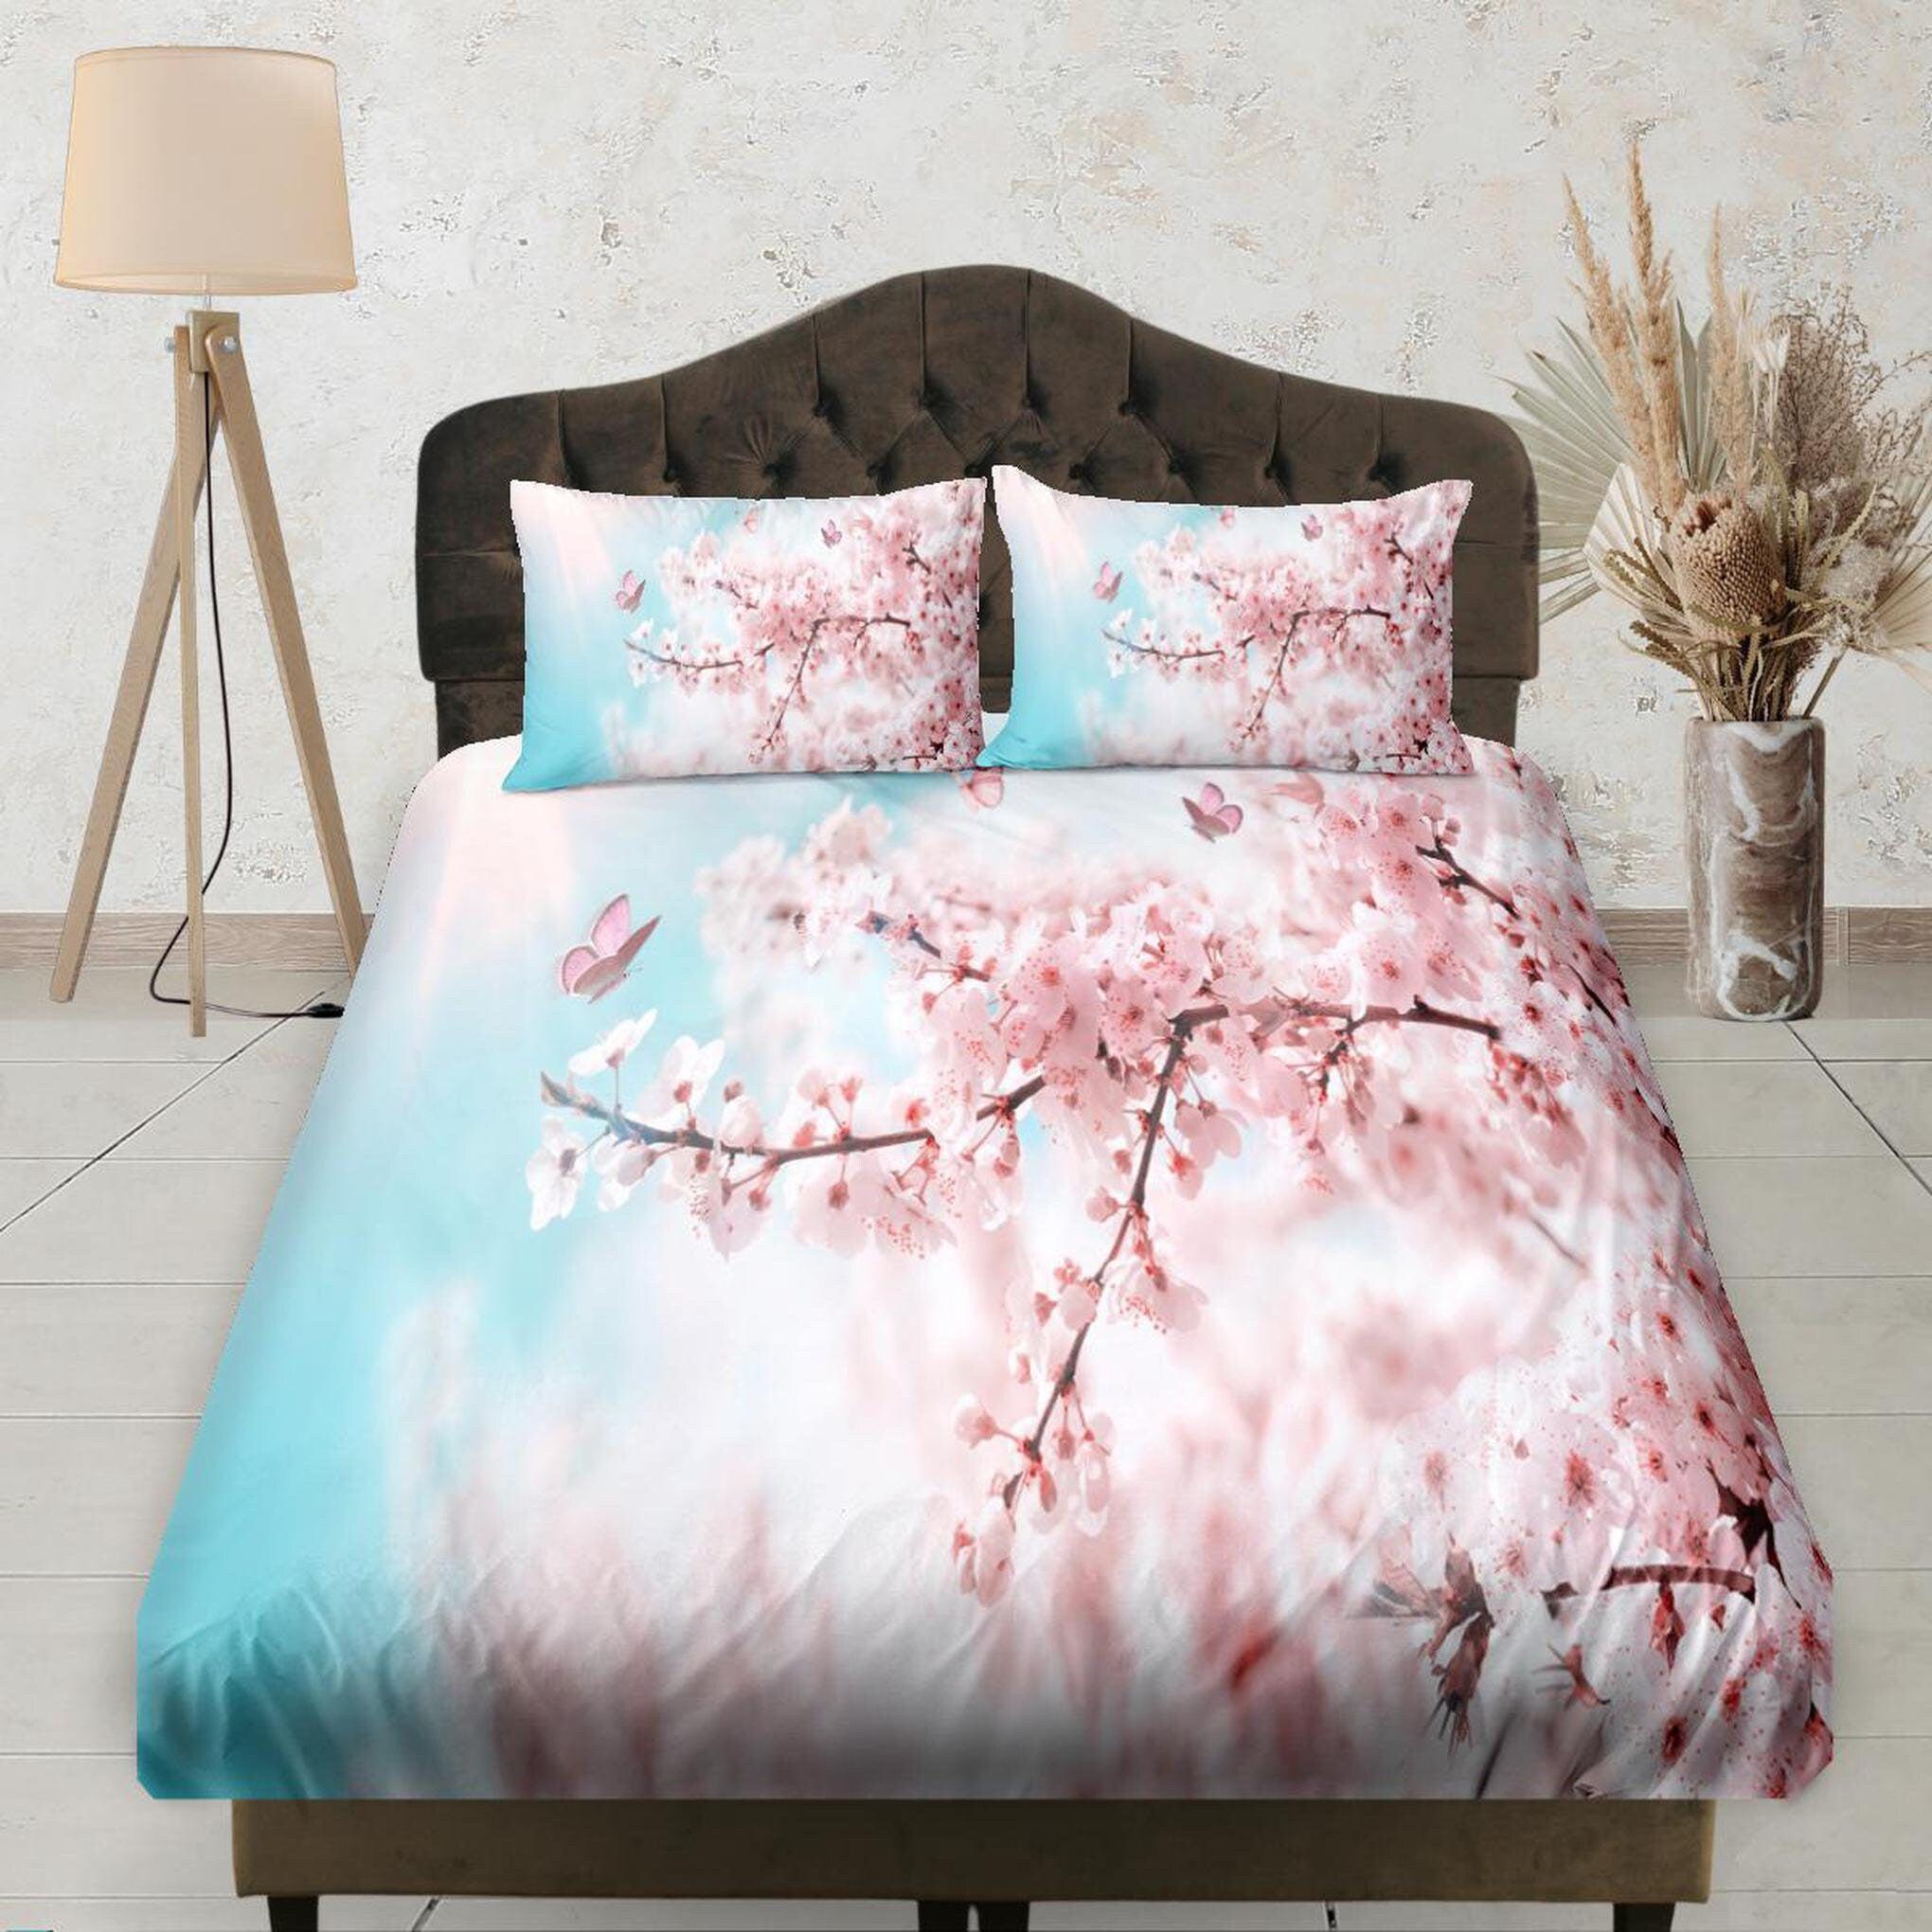 daintyduvet View of Cherry Blossoms with Blue Sky, Fitted Bedsheet, Floral Prints, Boho Bedding Set, Dorm Bedding, Crib Sheet, Shabby Chic Bedding